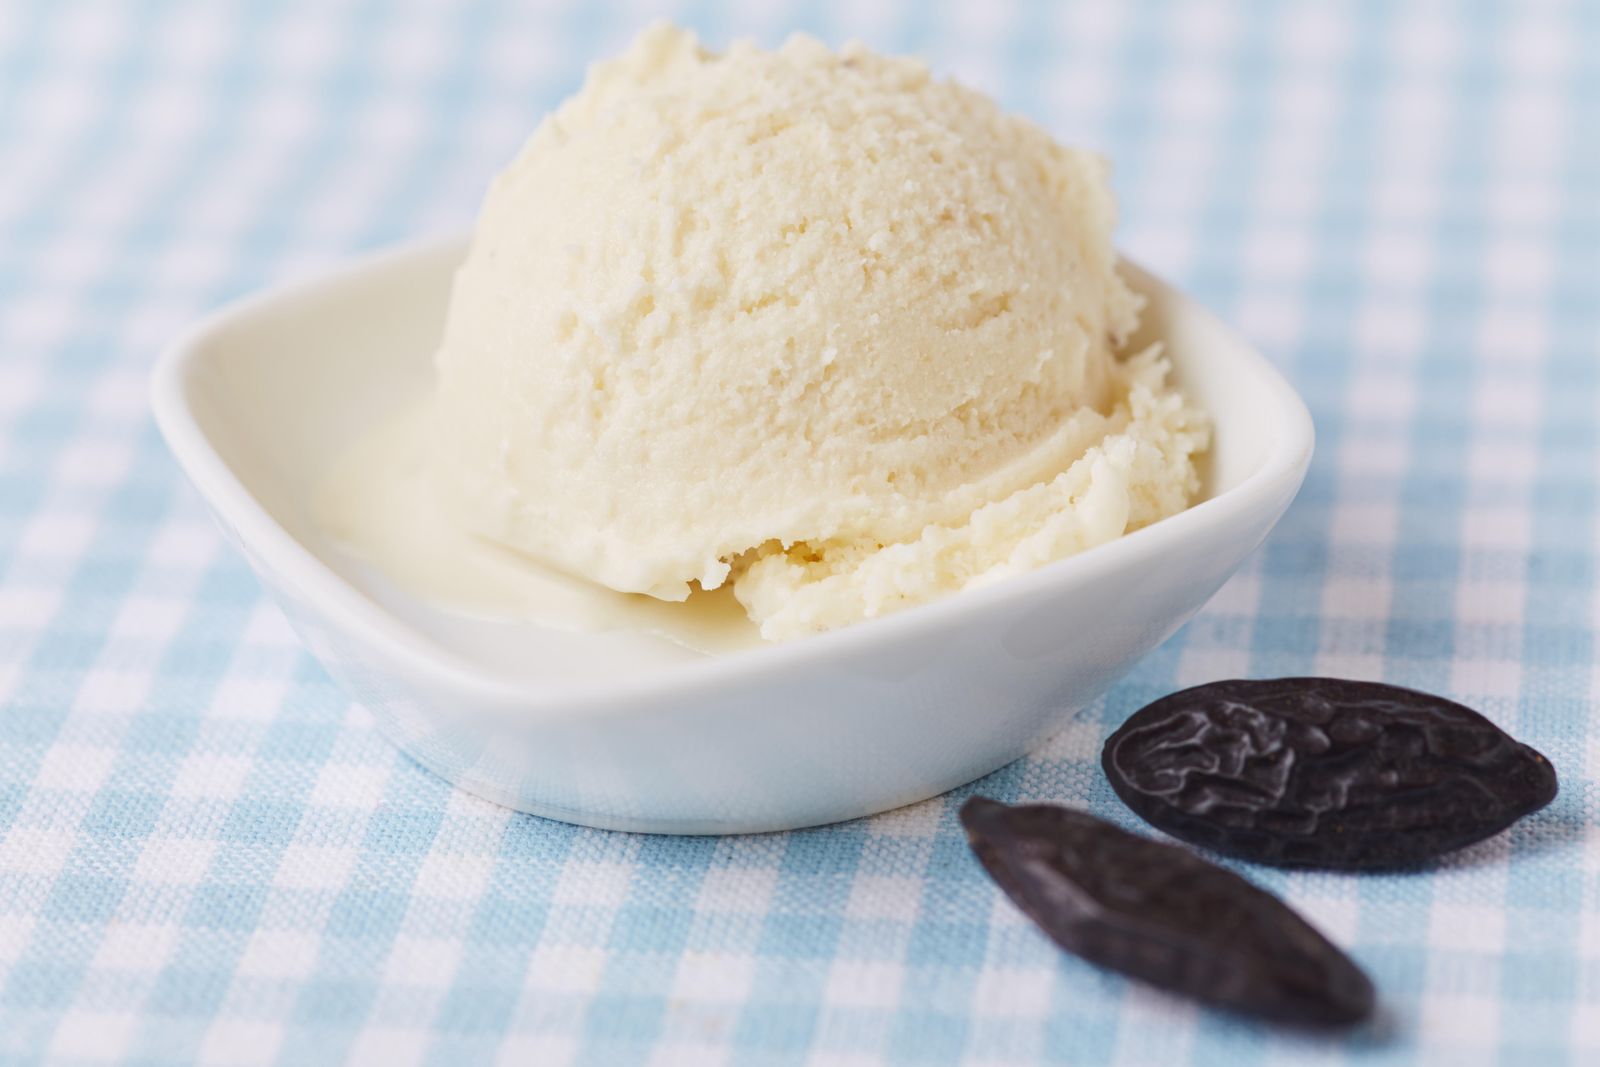 Is sustainable vanilla the flavor of the month?